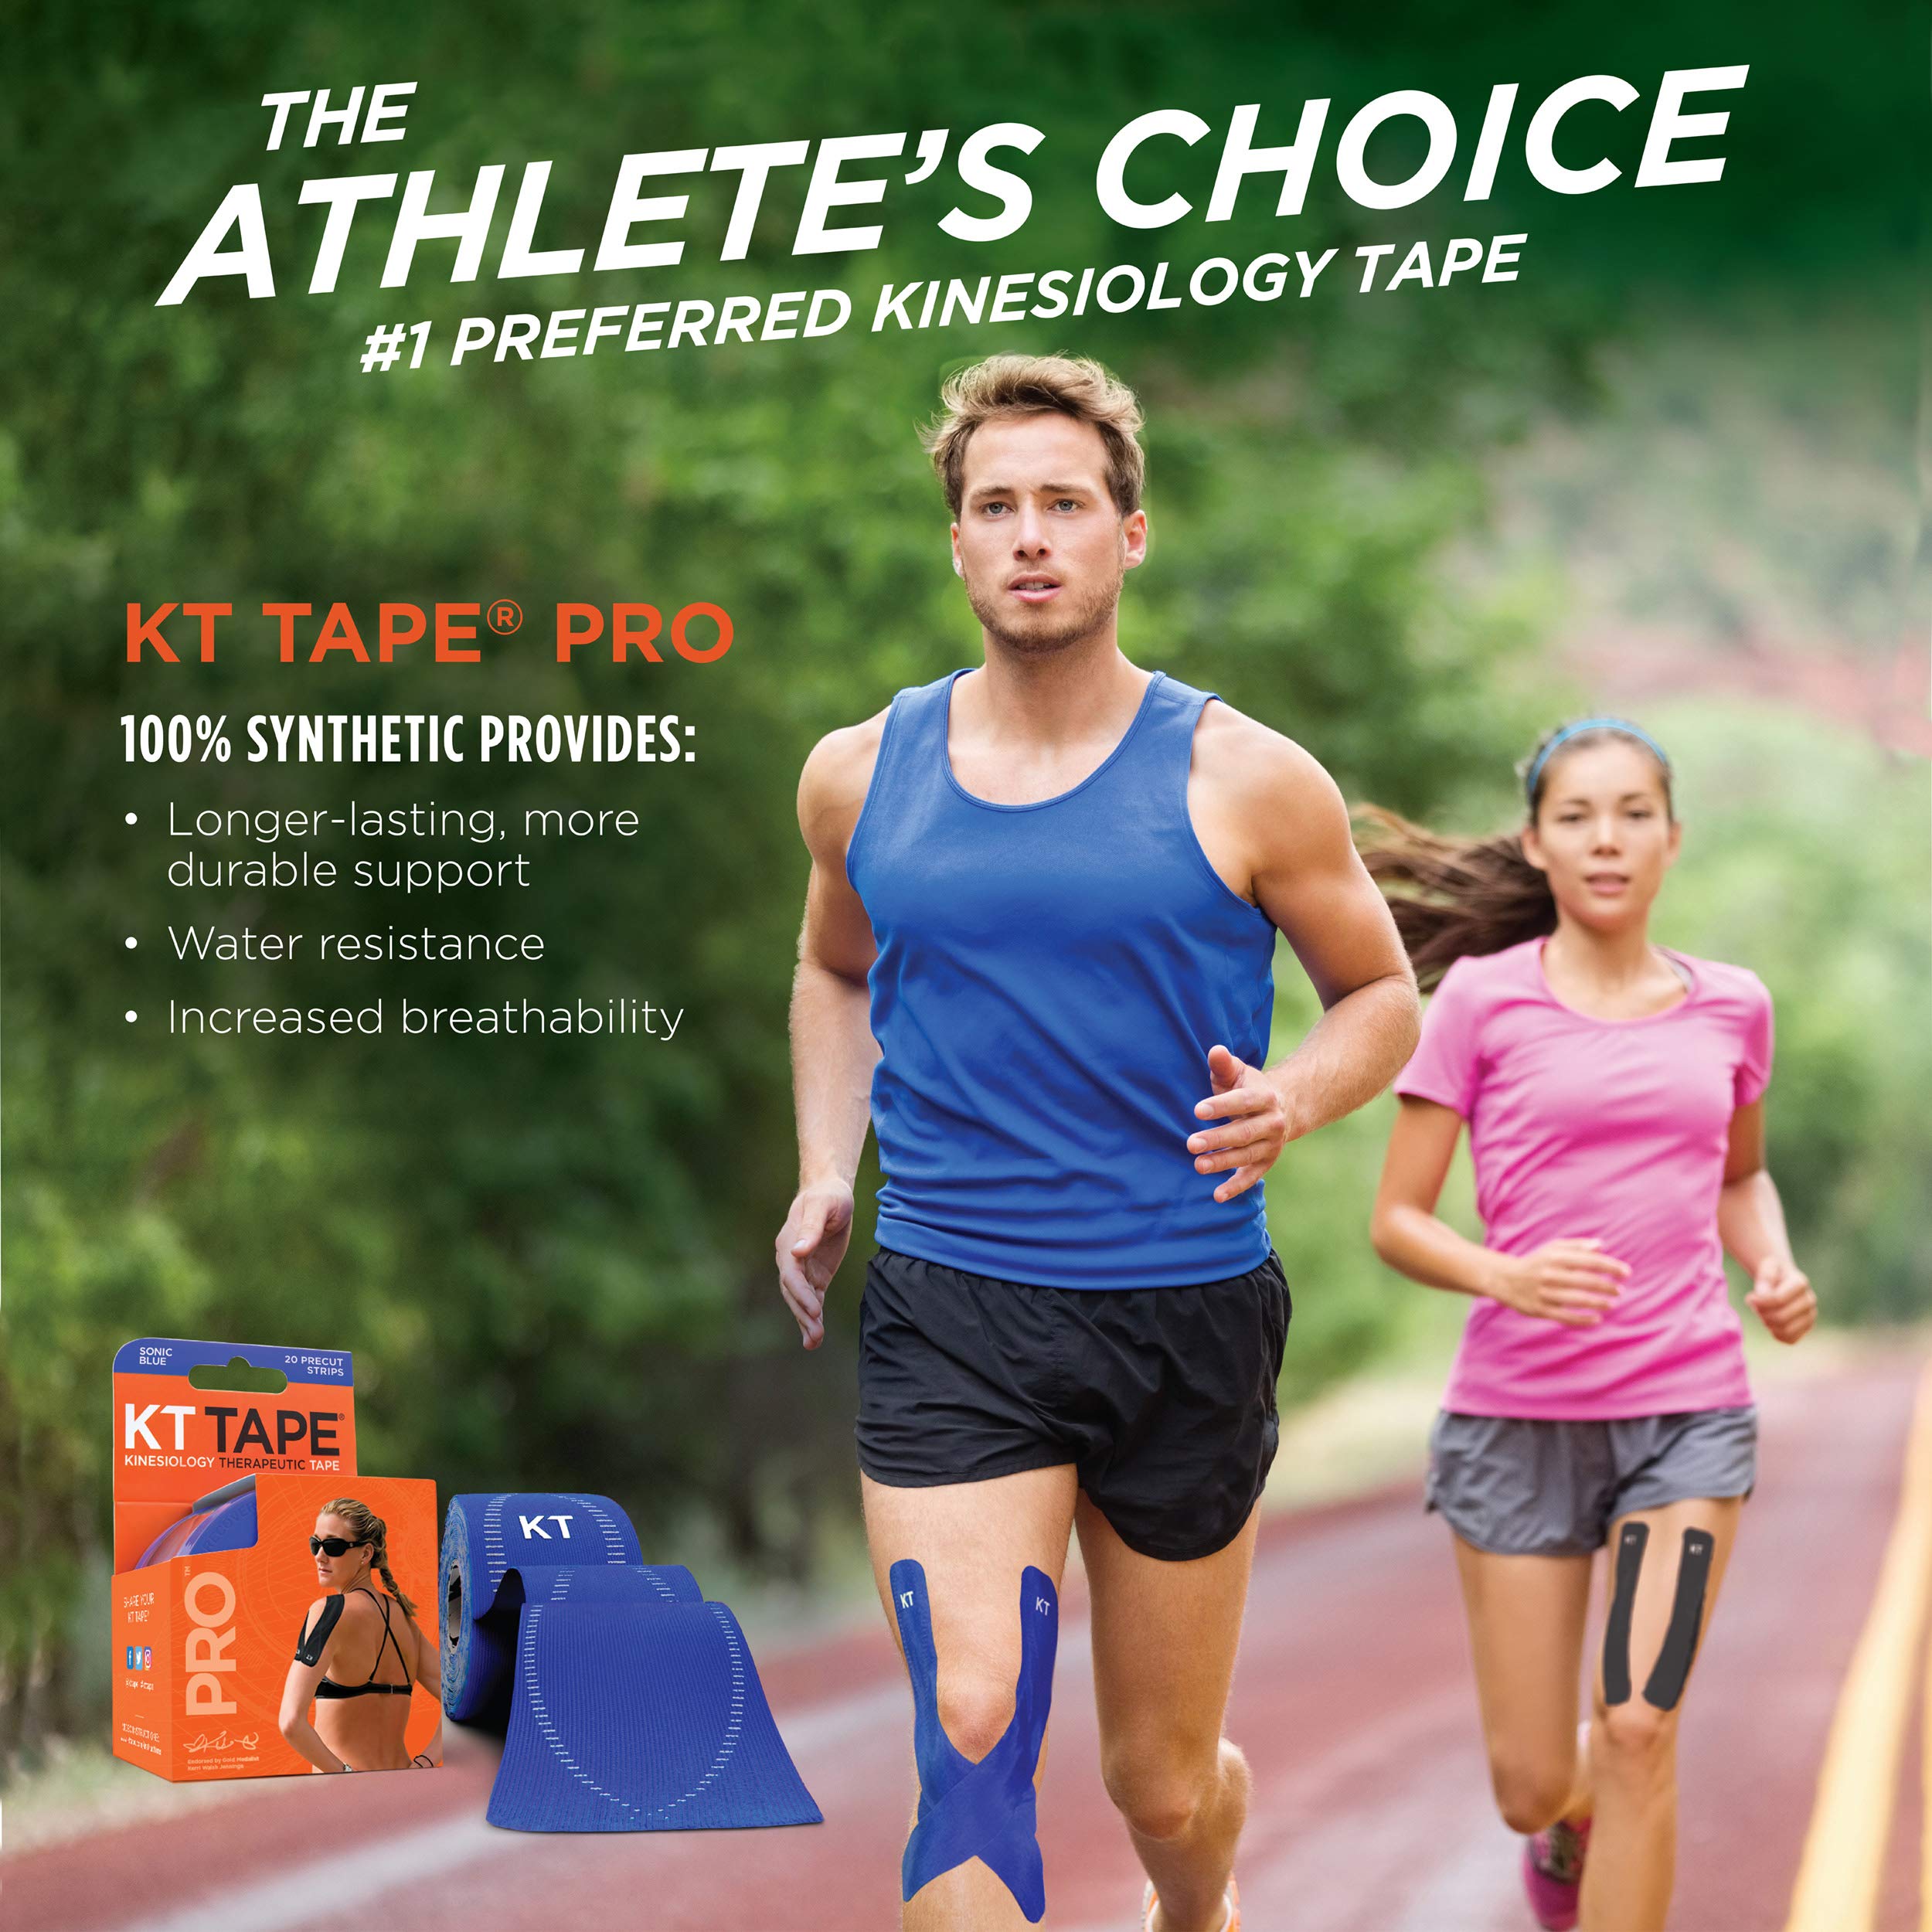 KT Tape Pro Kinesiology Therapeutic Sports Tape,